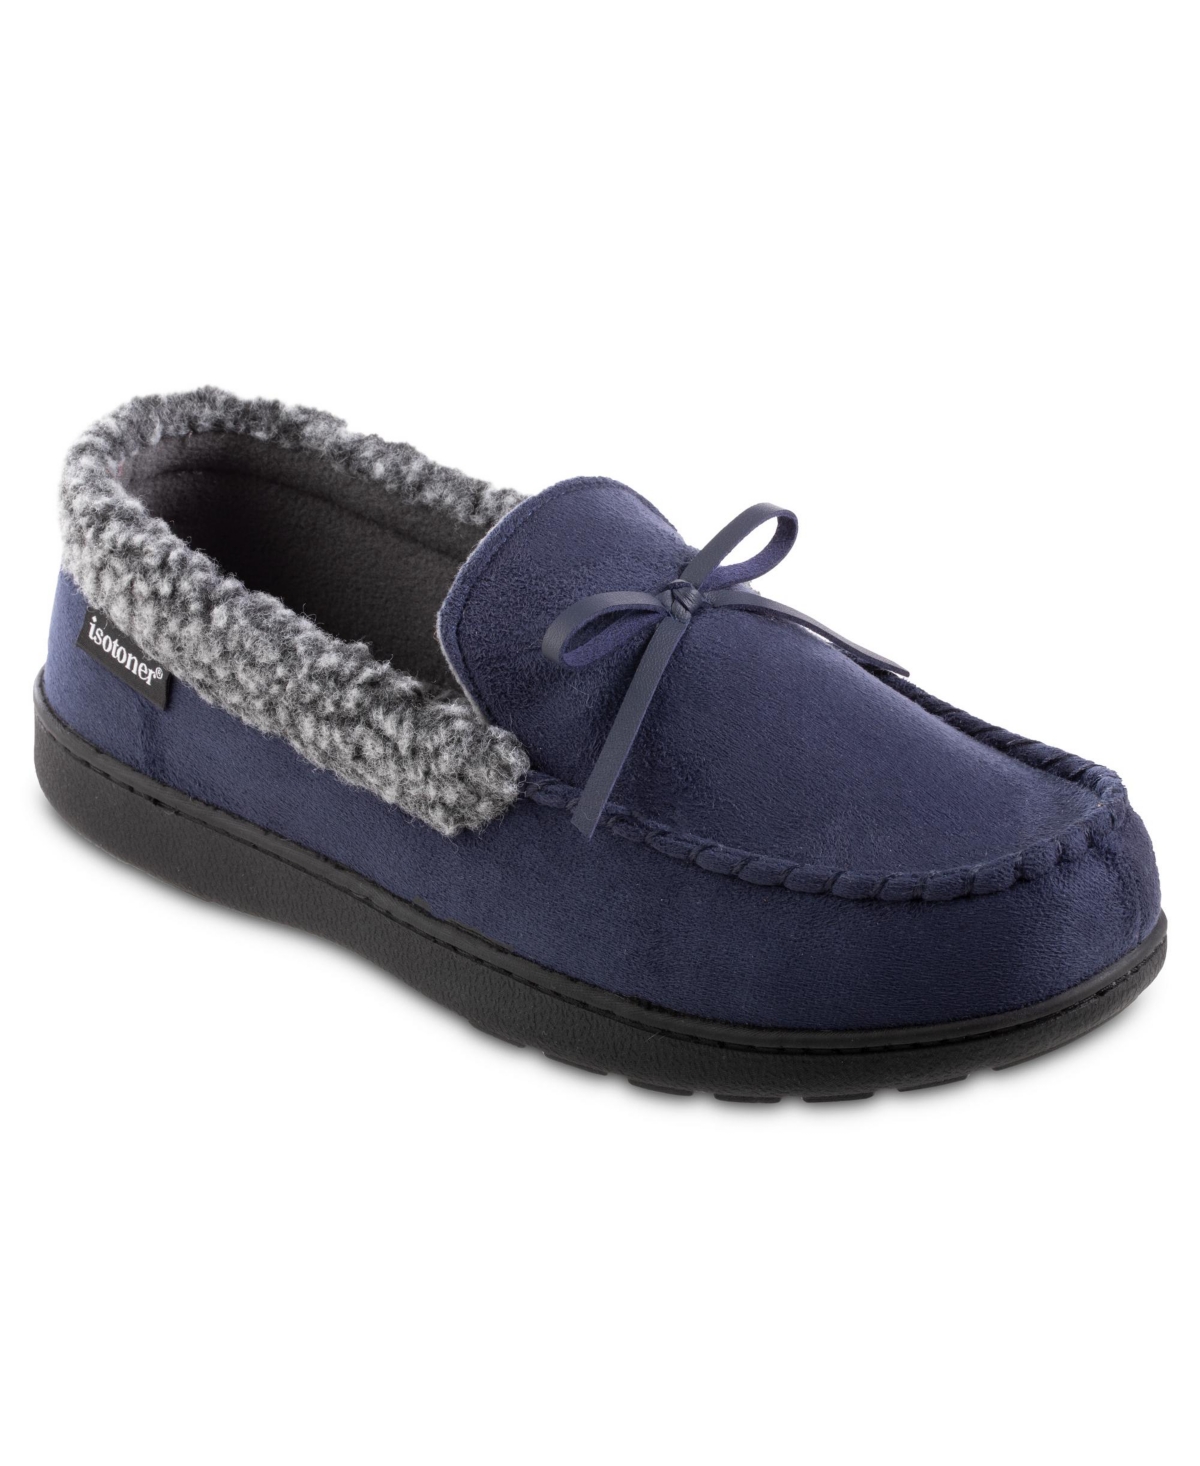 Signature Men's Moccasin Slippers - Navy Blue